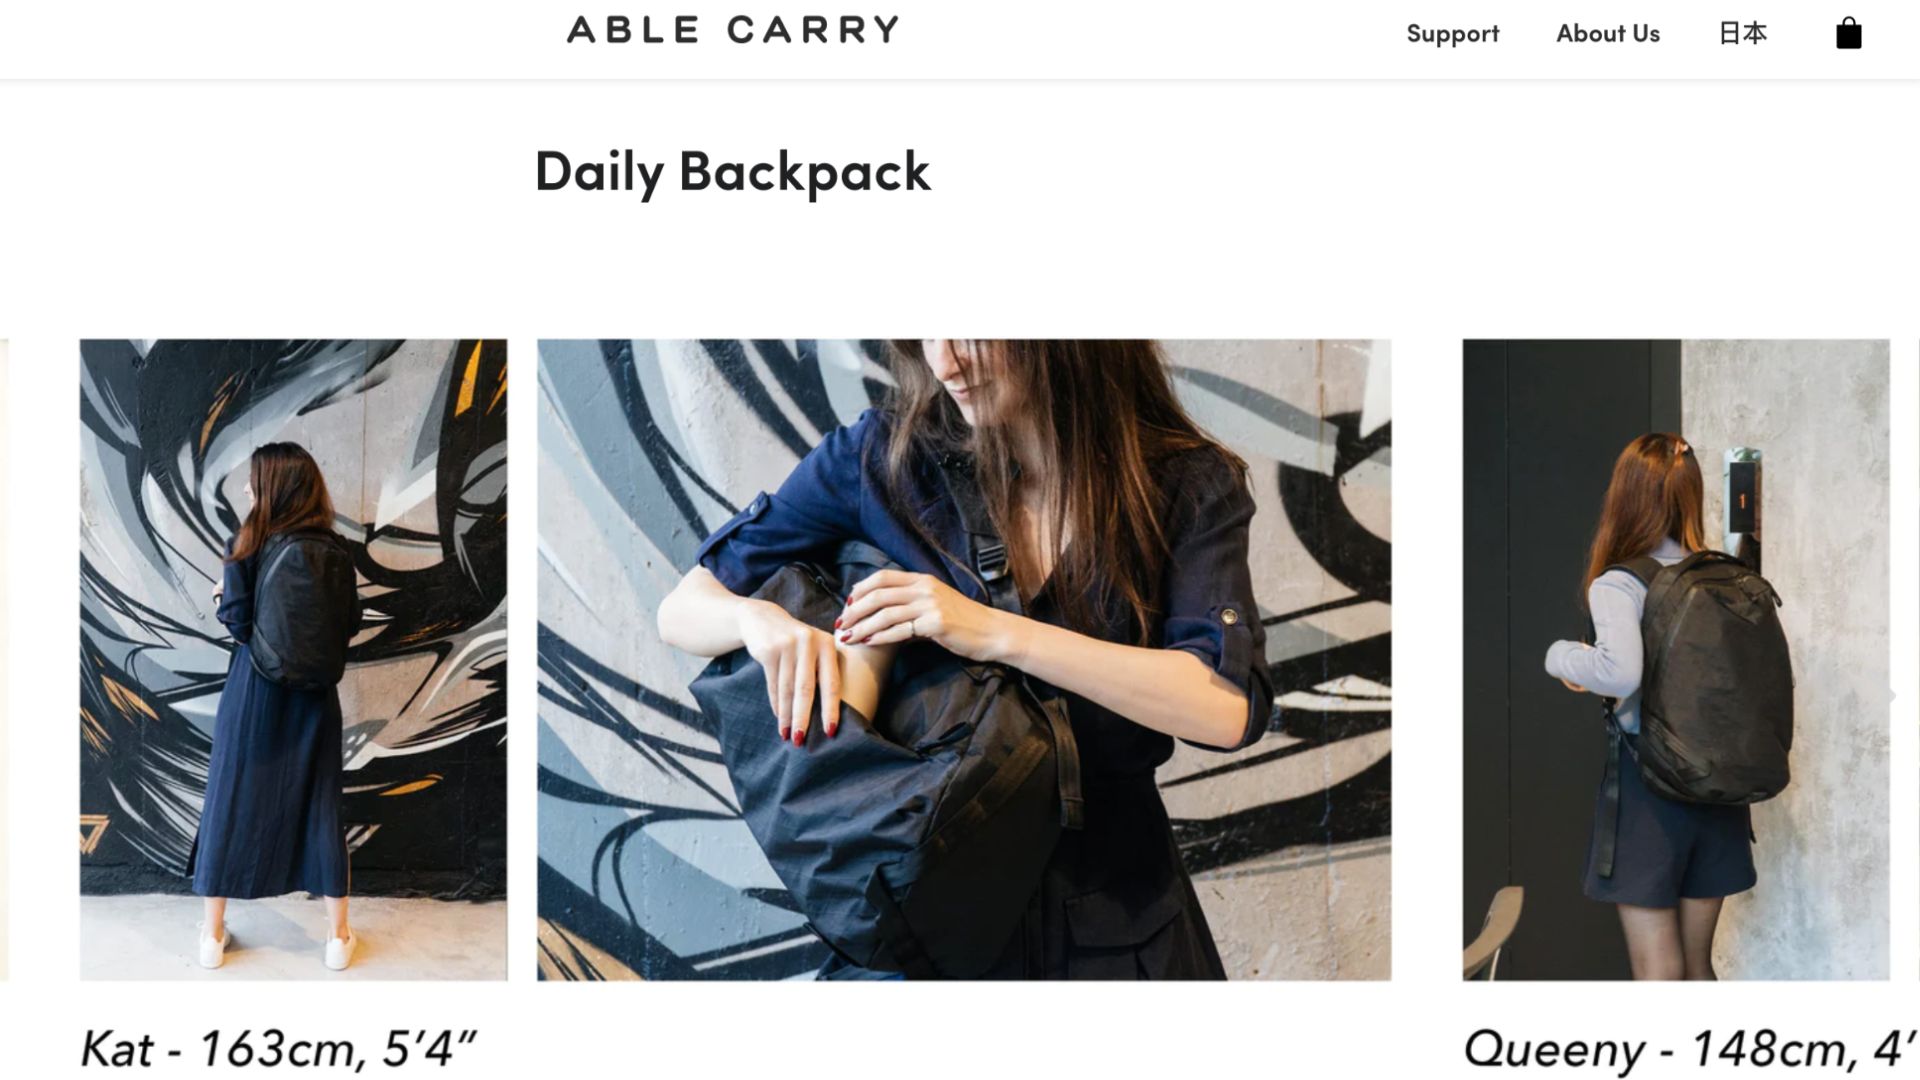 Able Carry has a fit guide to help customers get better visualise how a backpack would fit their body type.